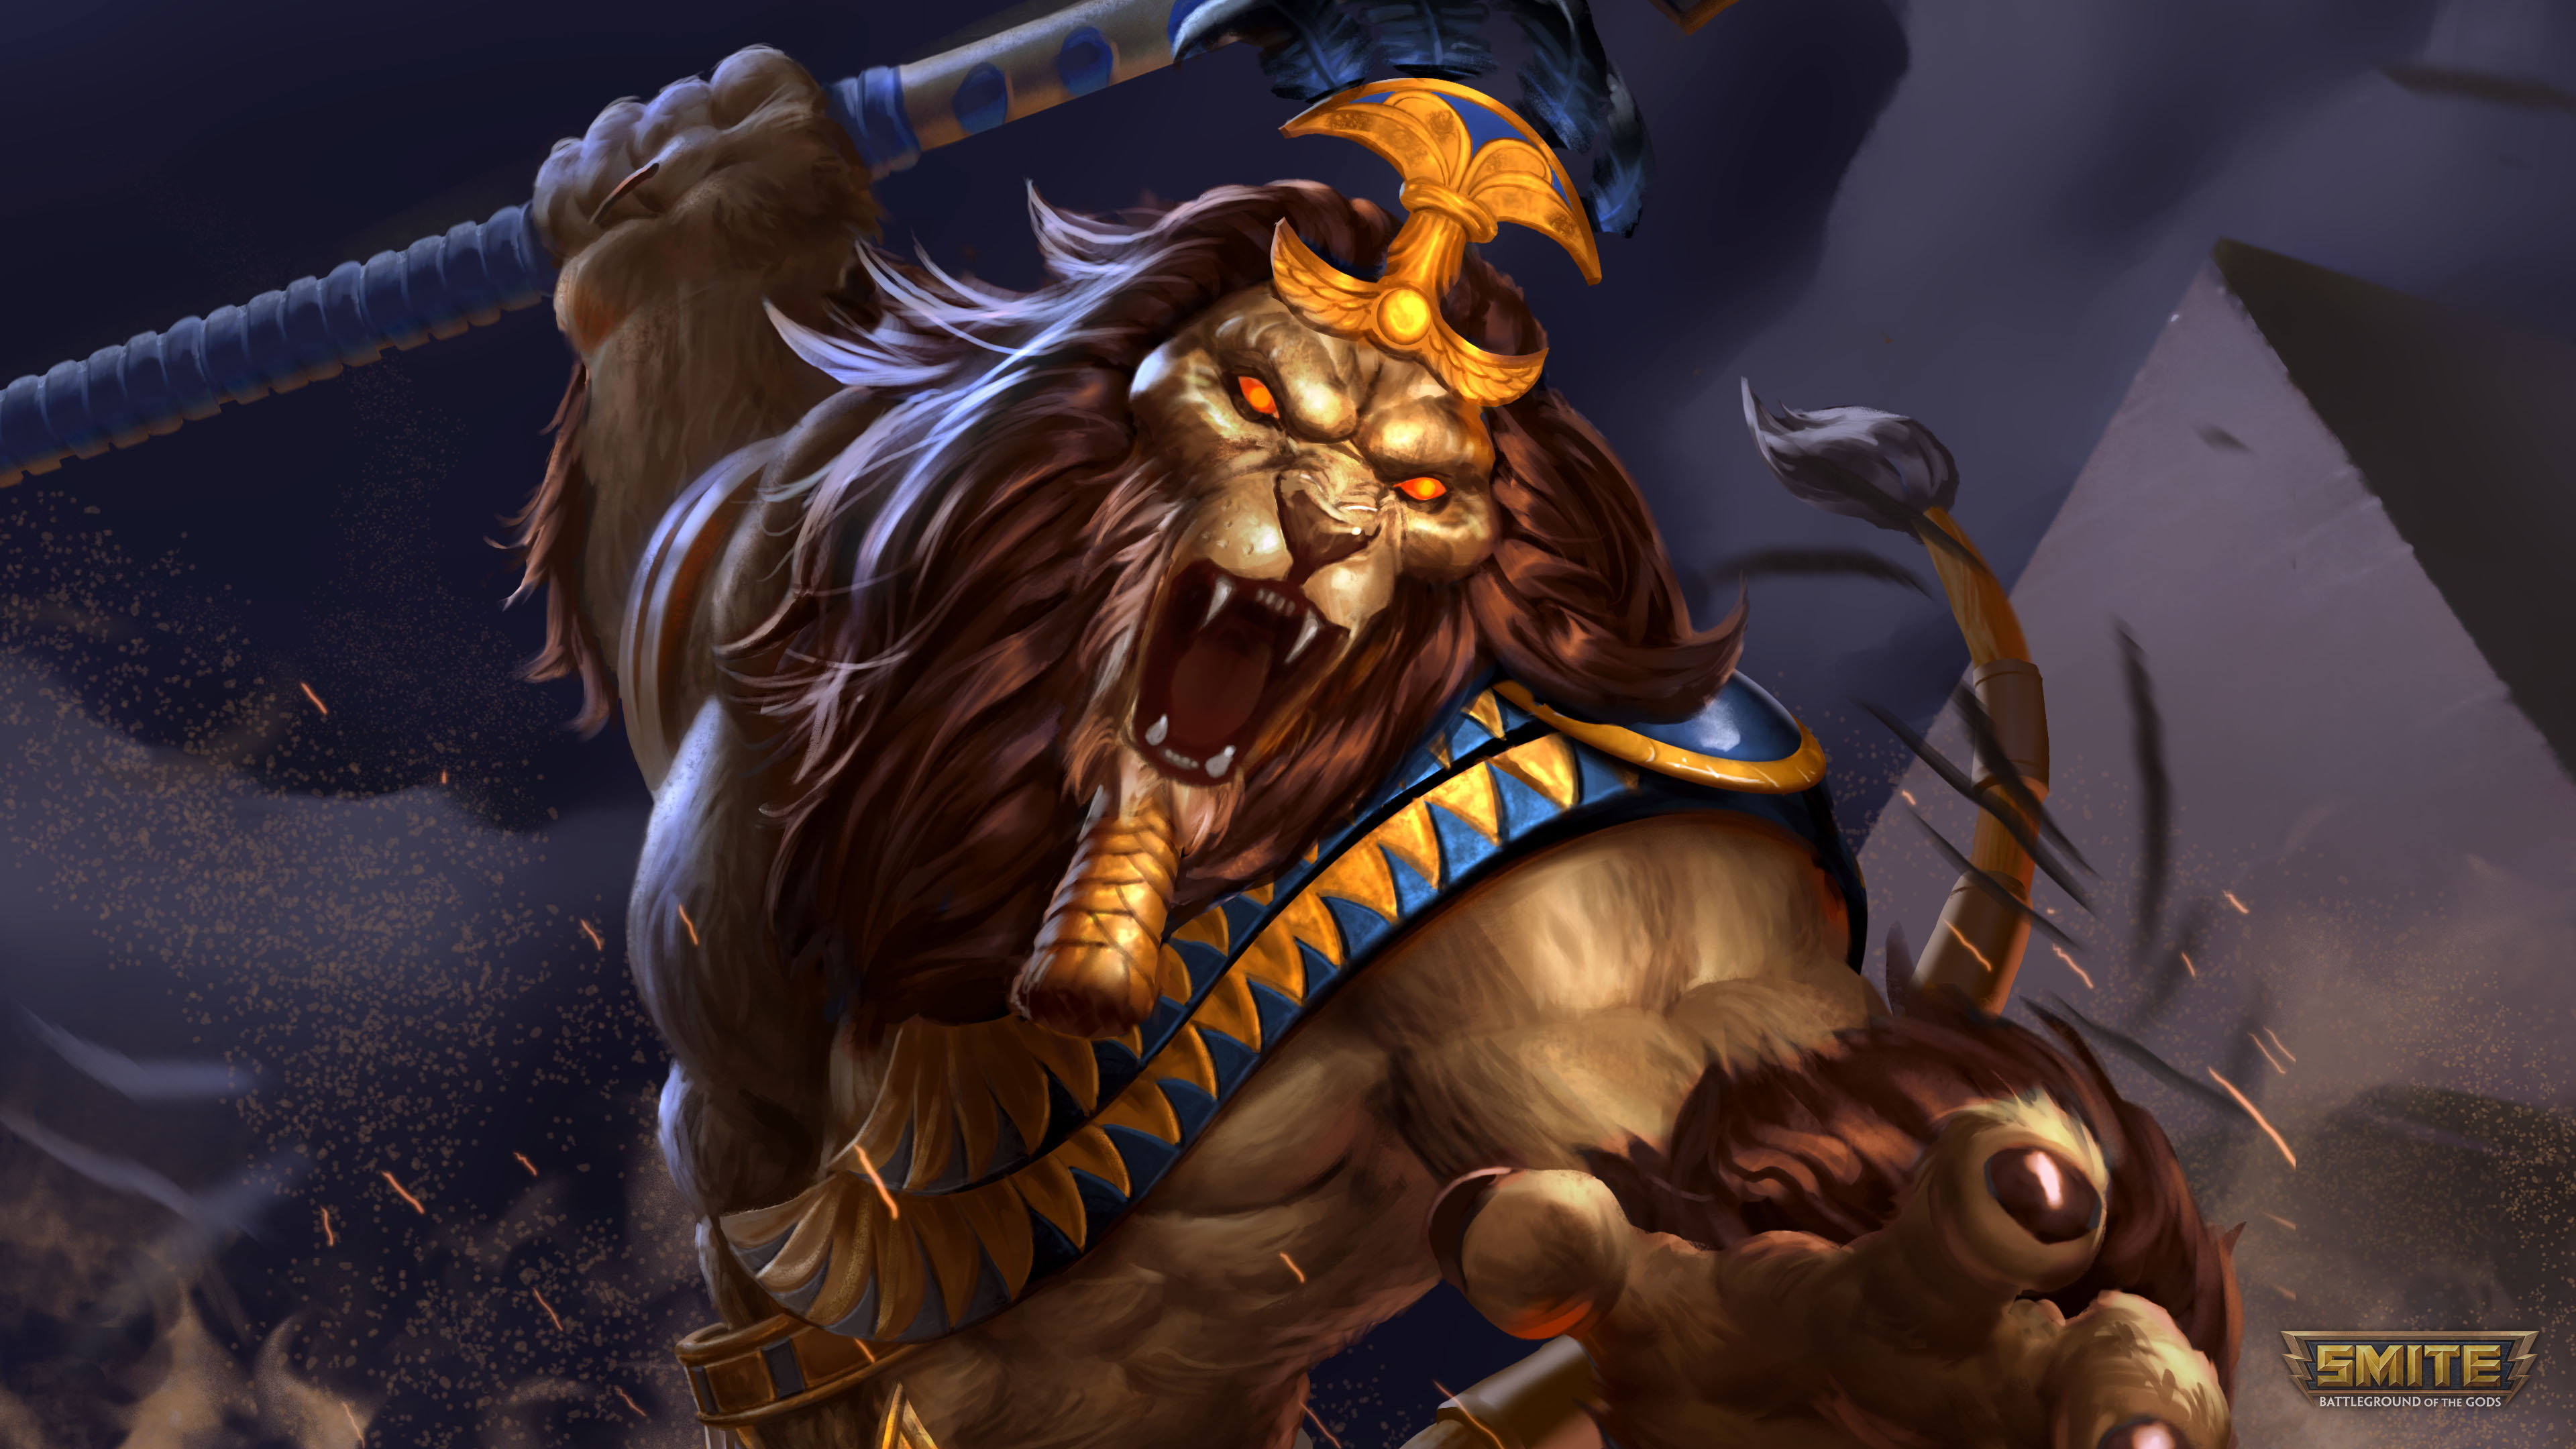 Anhur Smite Wallpapers